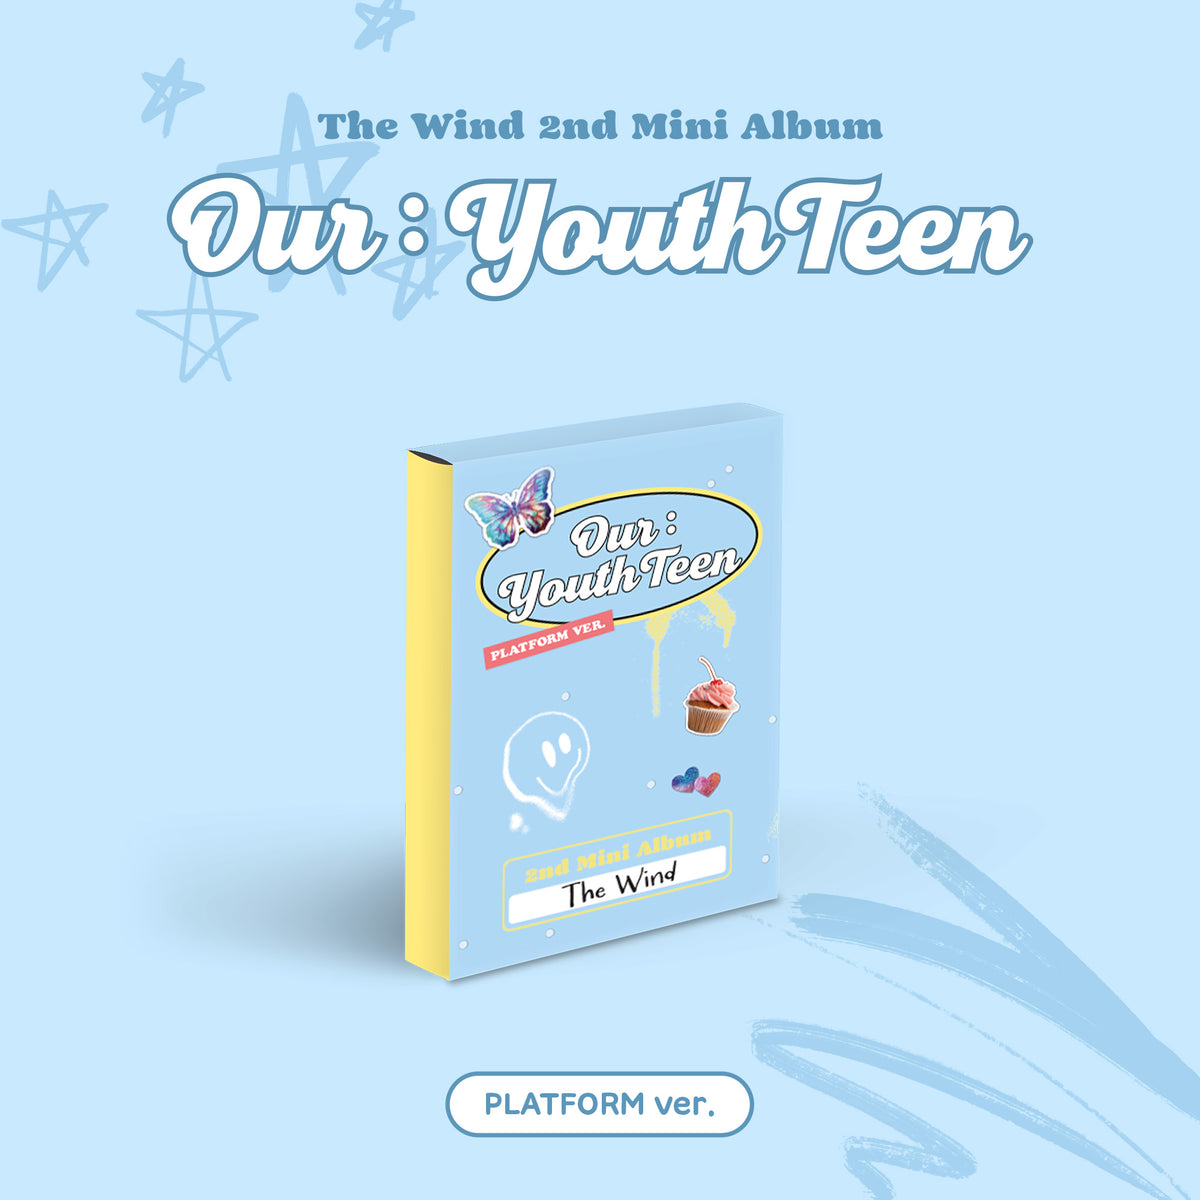 THE WIND - OUR YOUTHTEEN 2ND MINI ALBUM PLATFORM VERSION